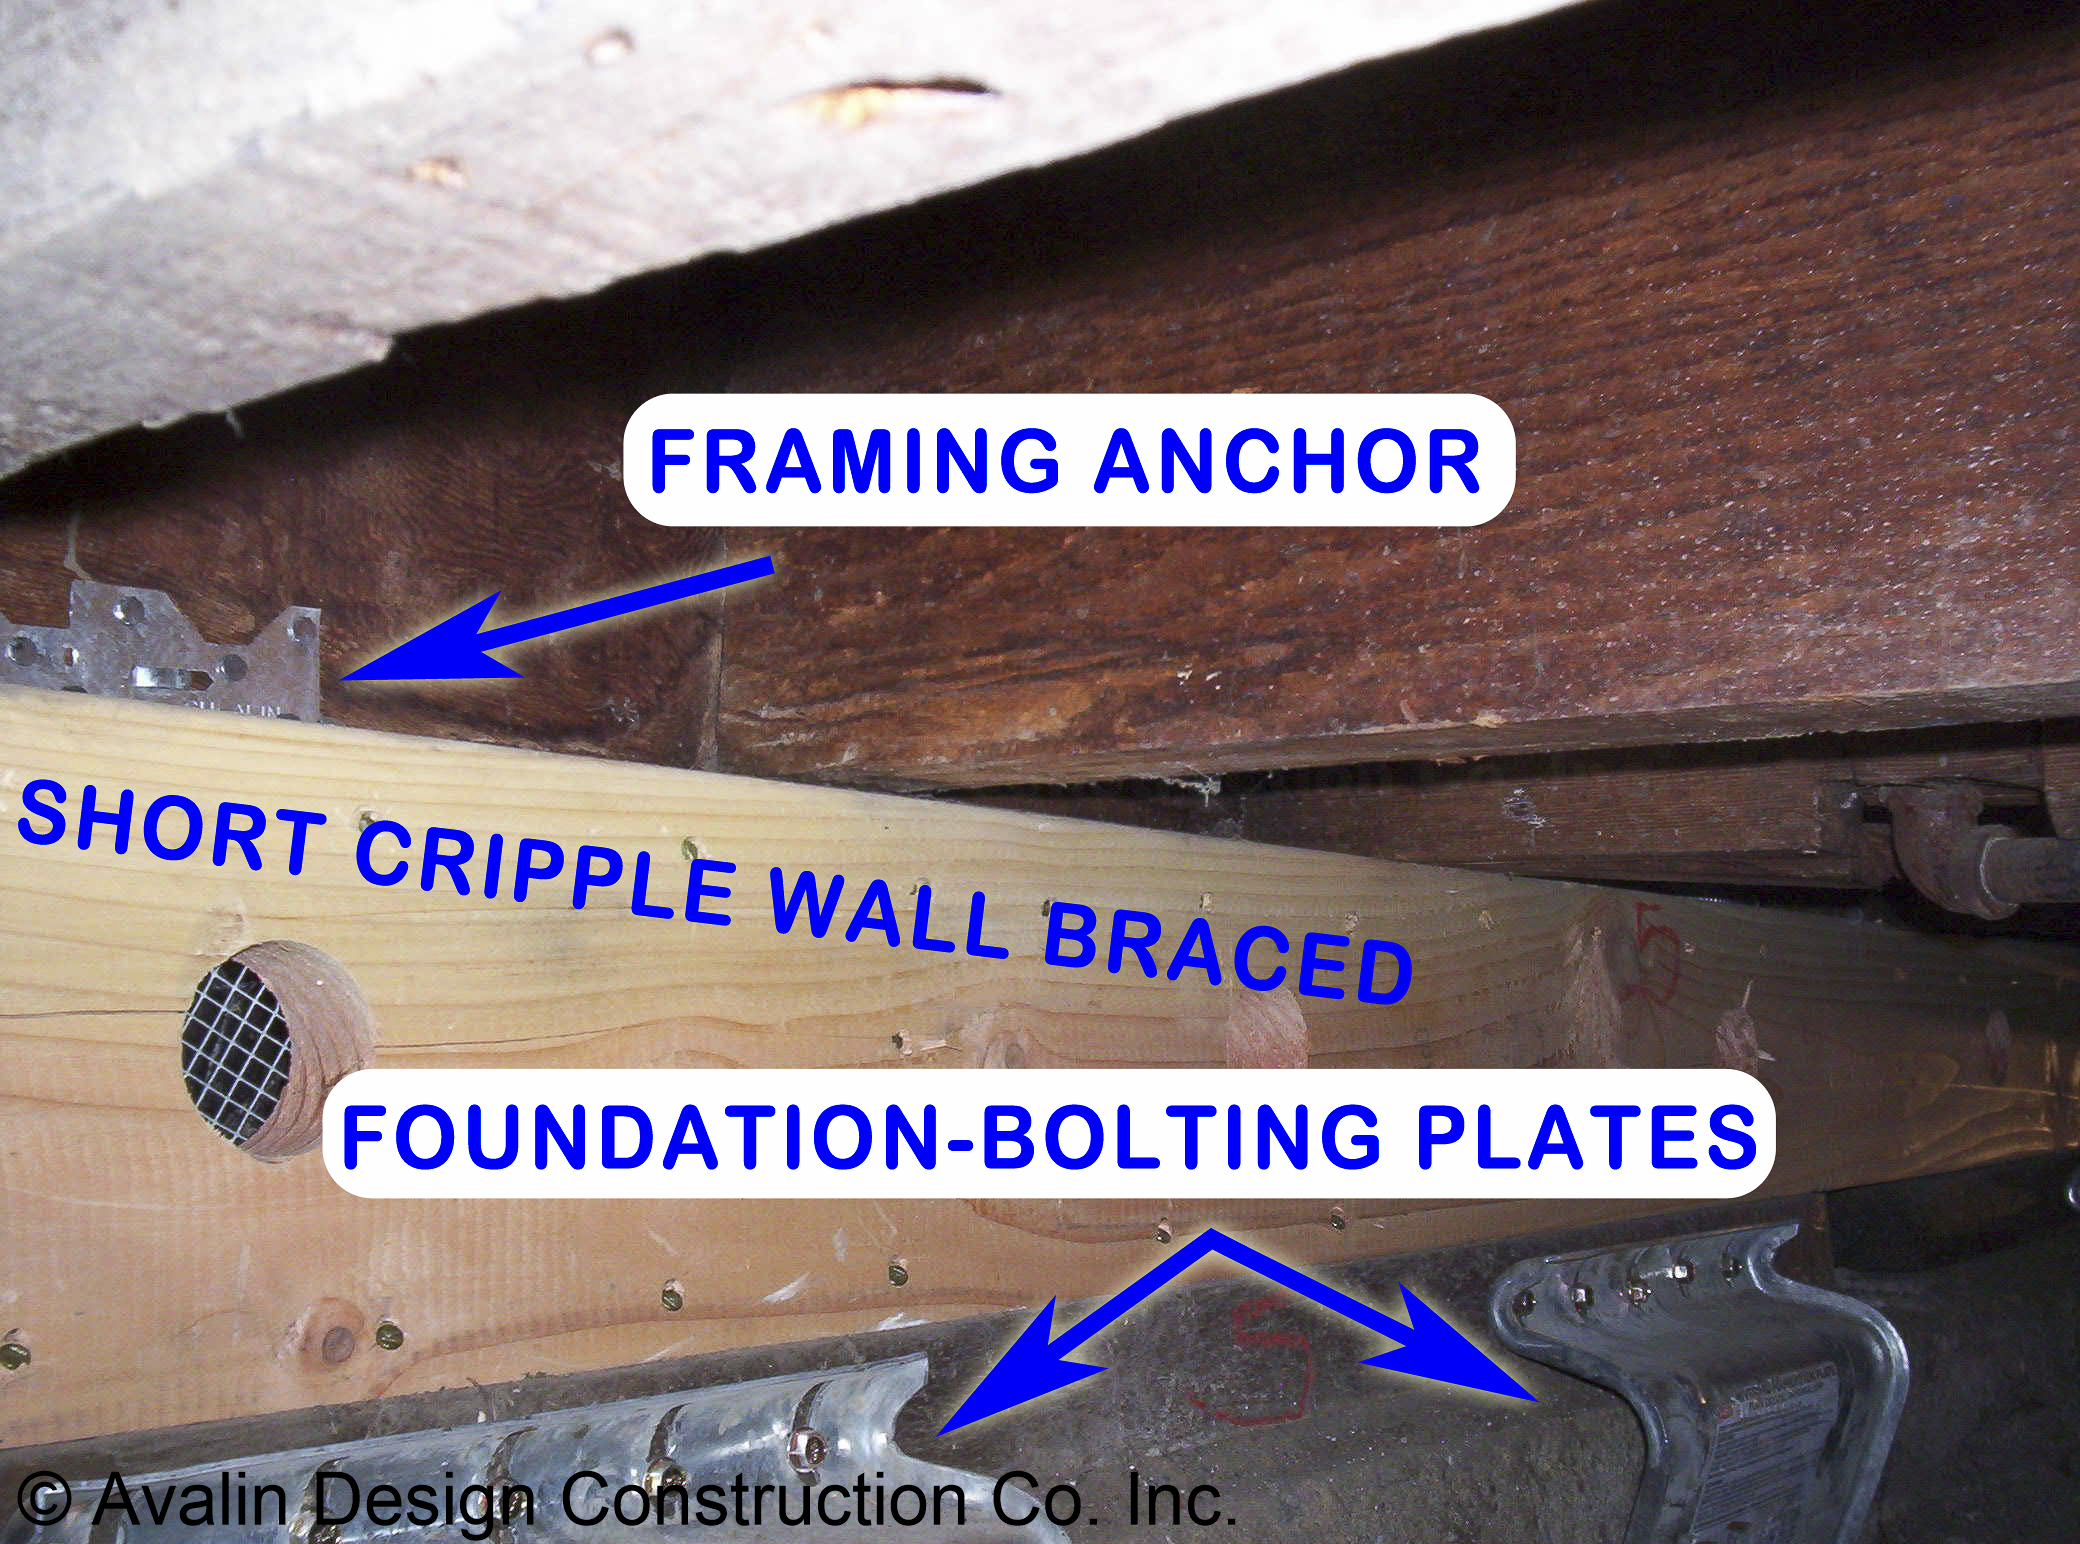 Short cripple wall braced with with foundation-bolting plates and framing anchor